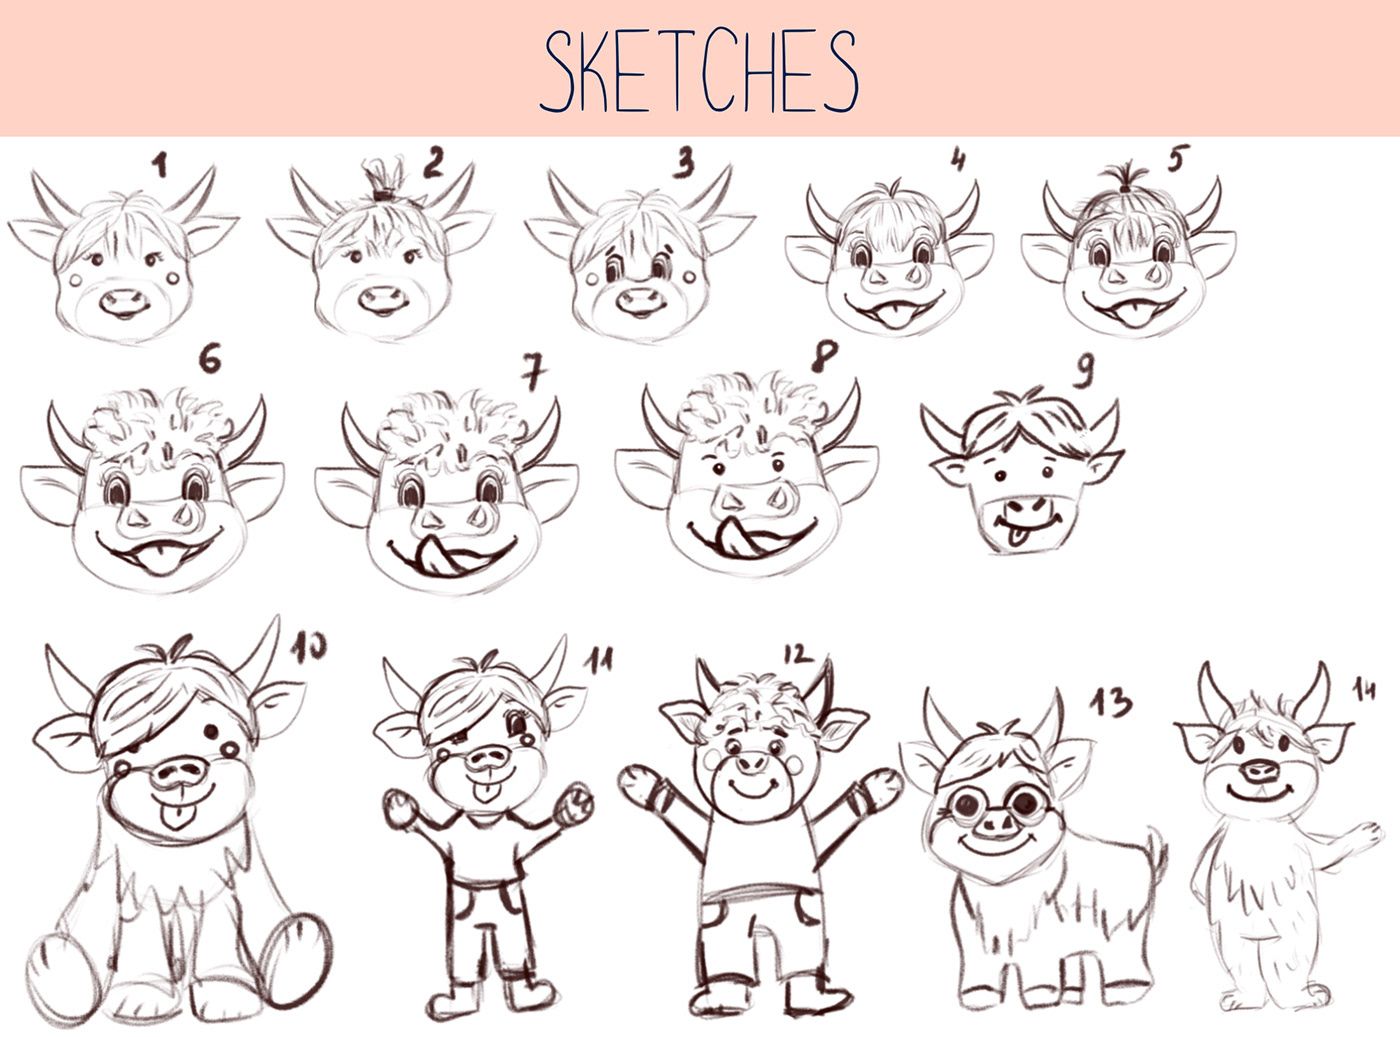 Sketches as a stage of creating a mascot